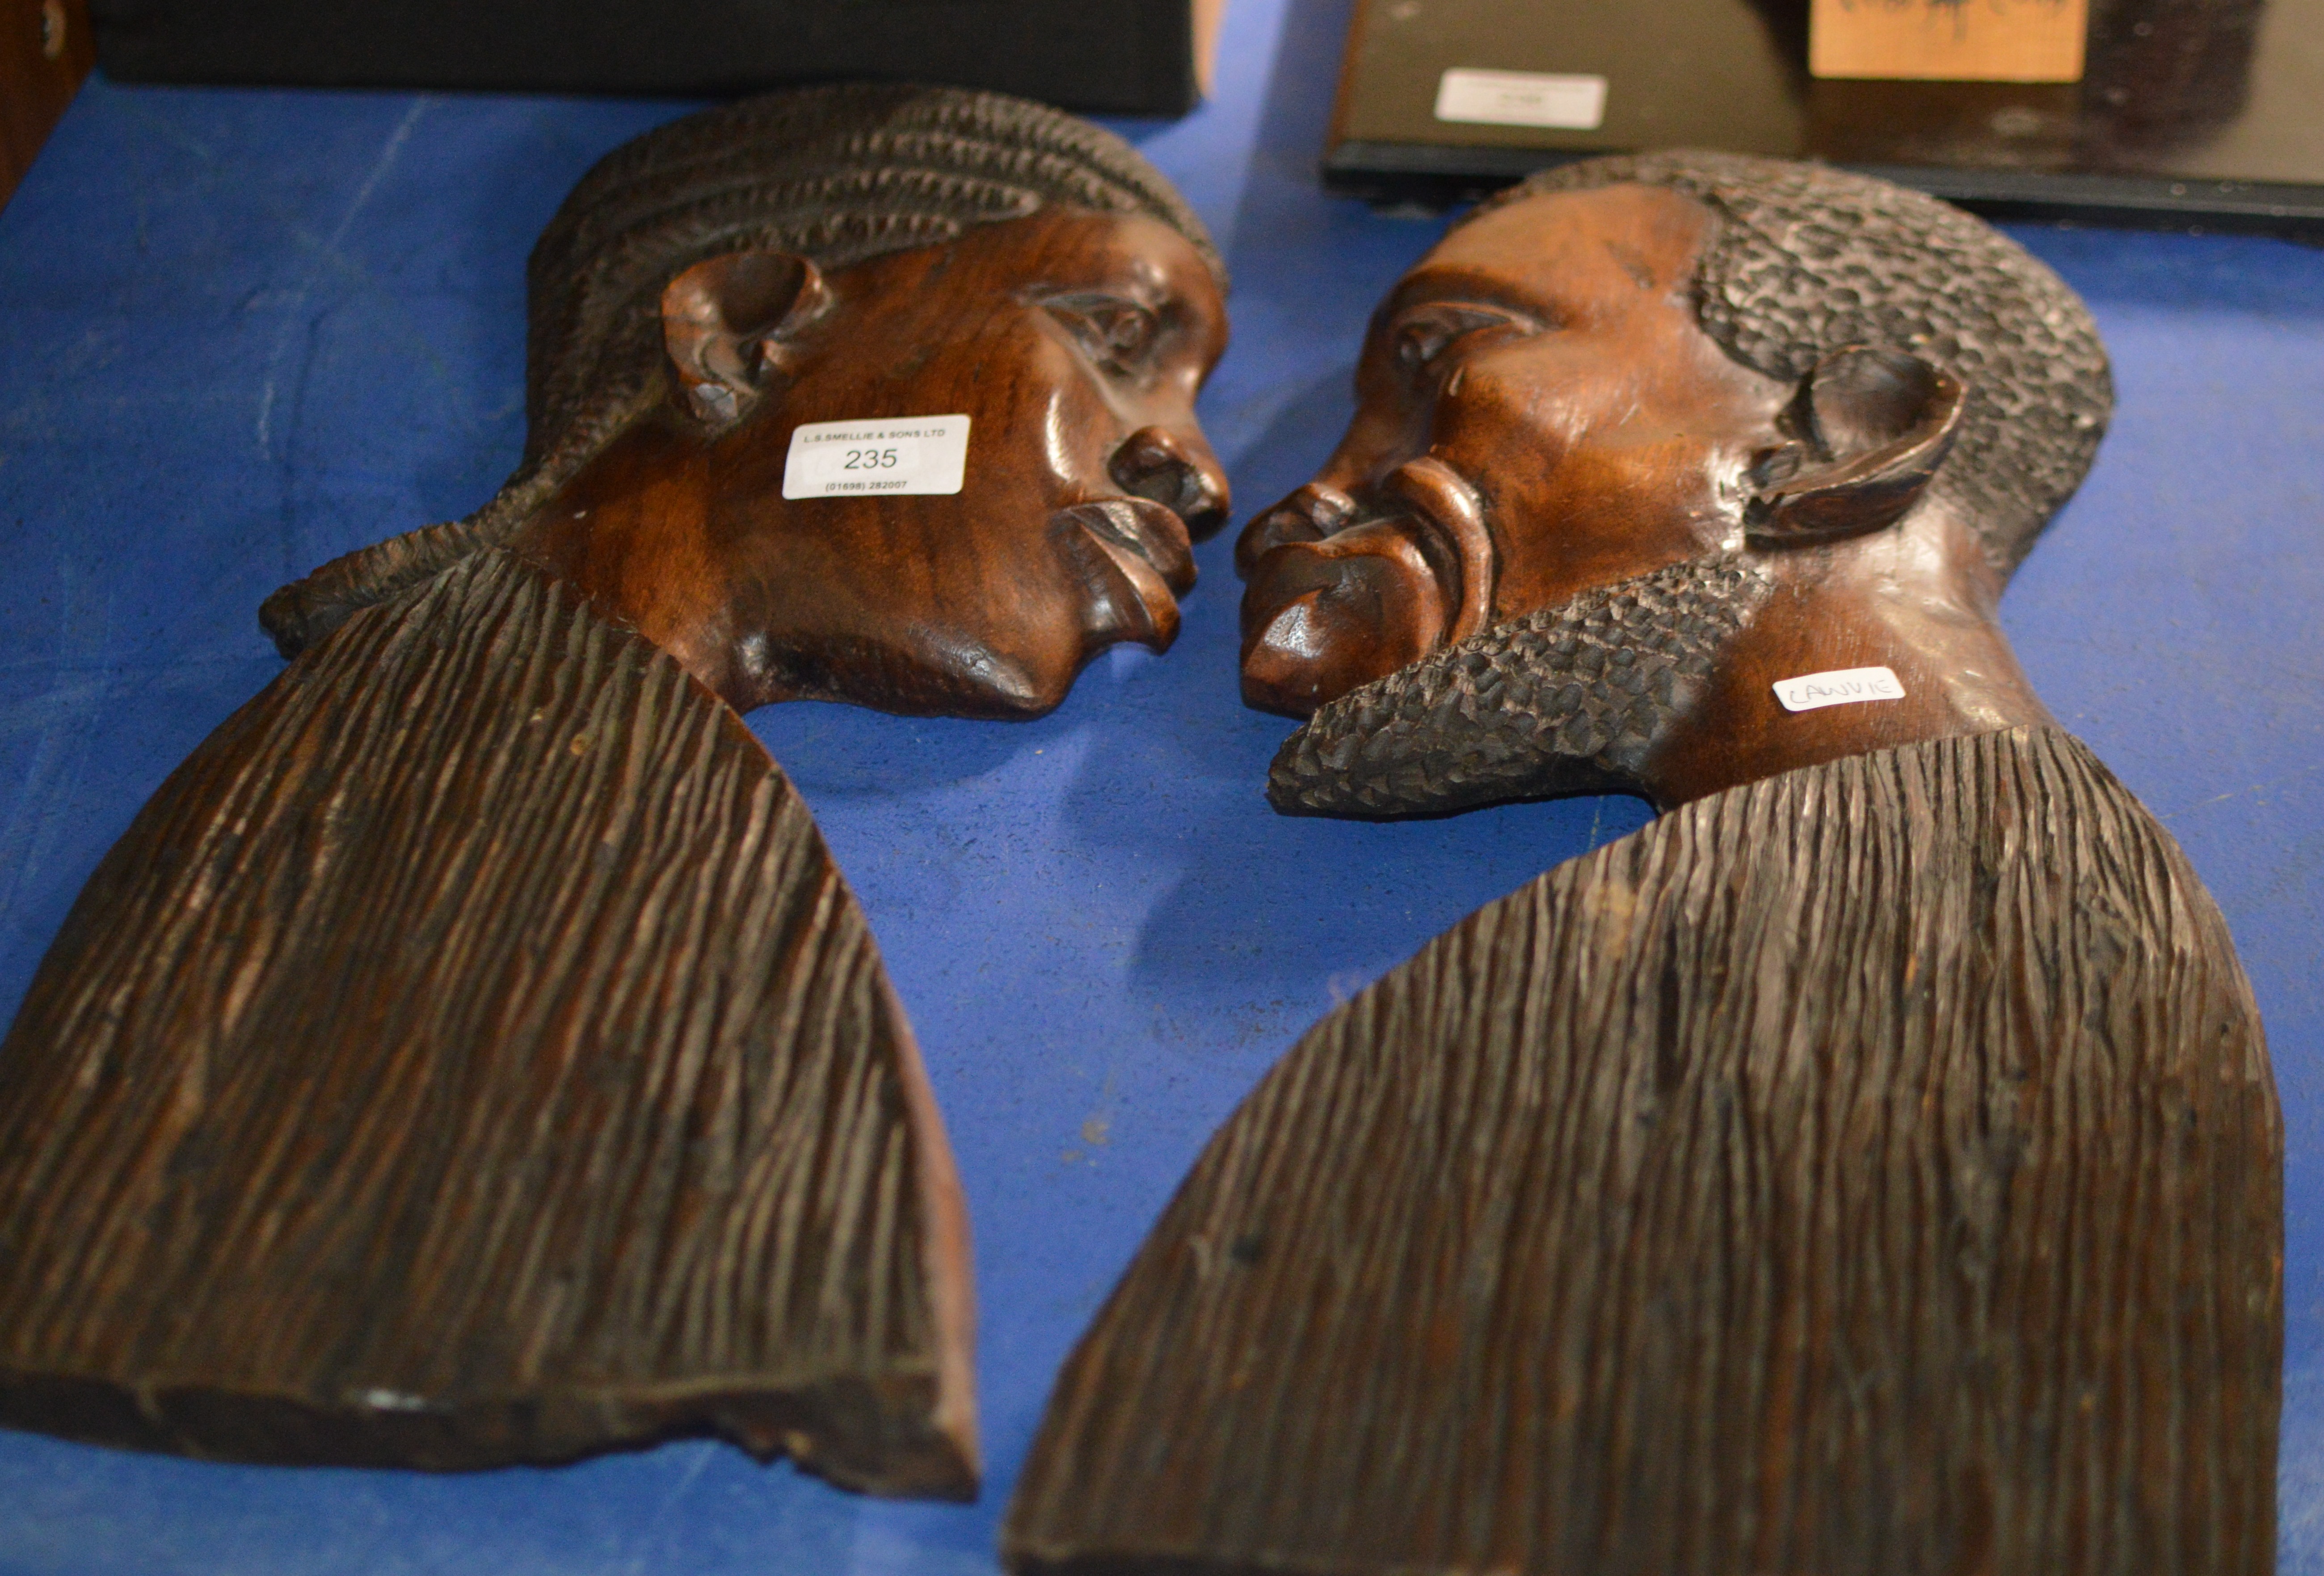 2 CARVED WOODEN AFRICAN BUST DISPLAYS